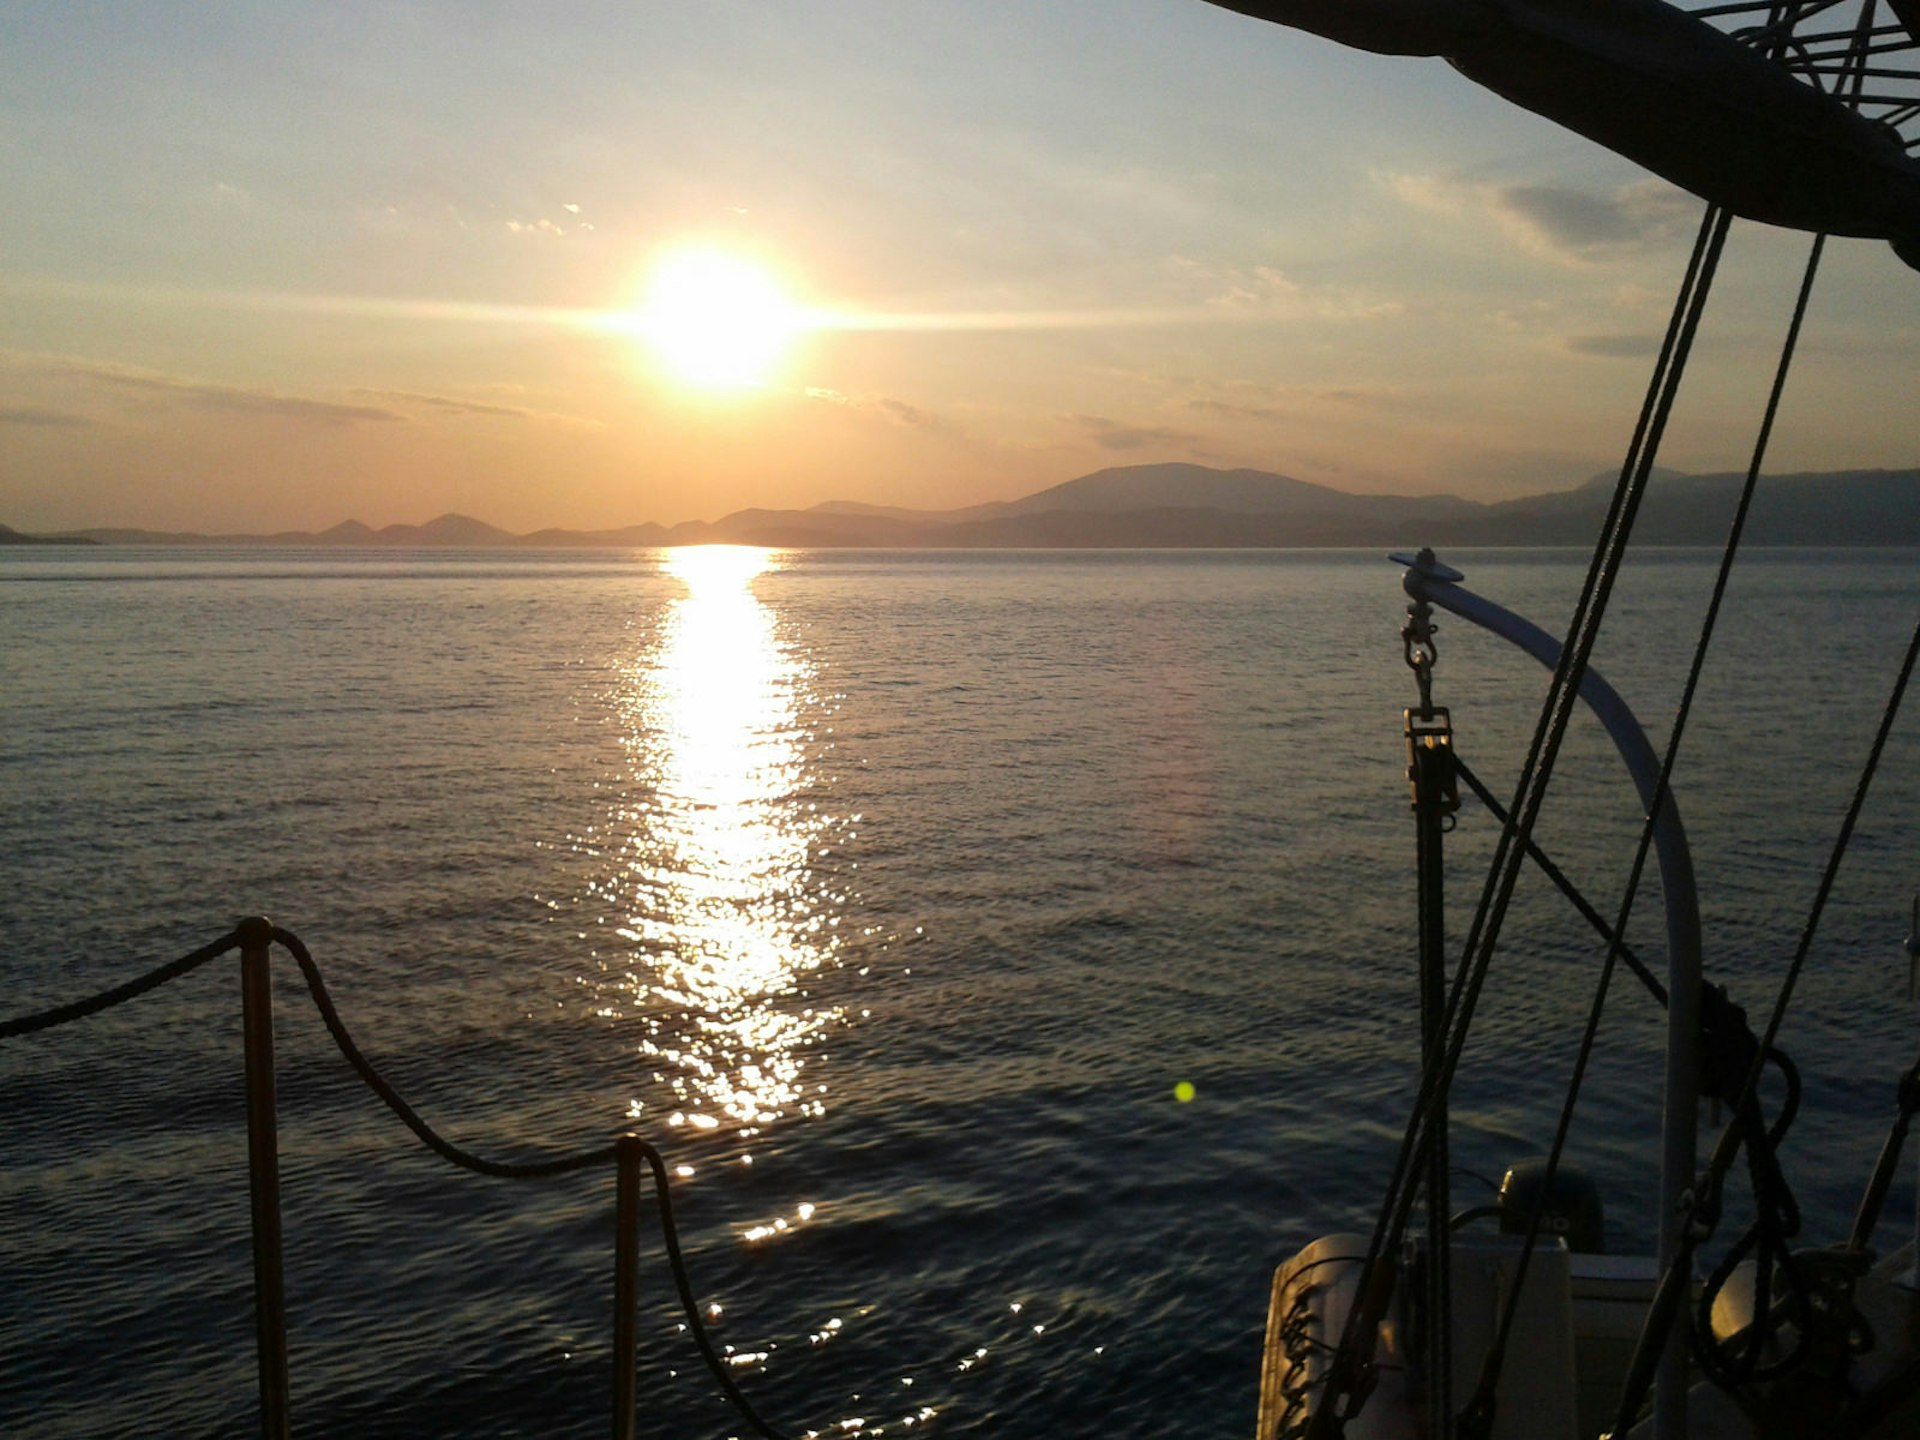 Sailing into the sunset on the Athenian Riviera © Marissa Tejada / Lonely Planet